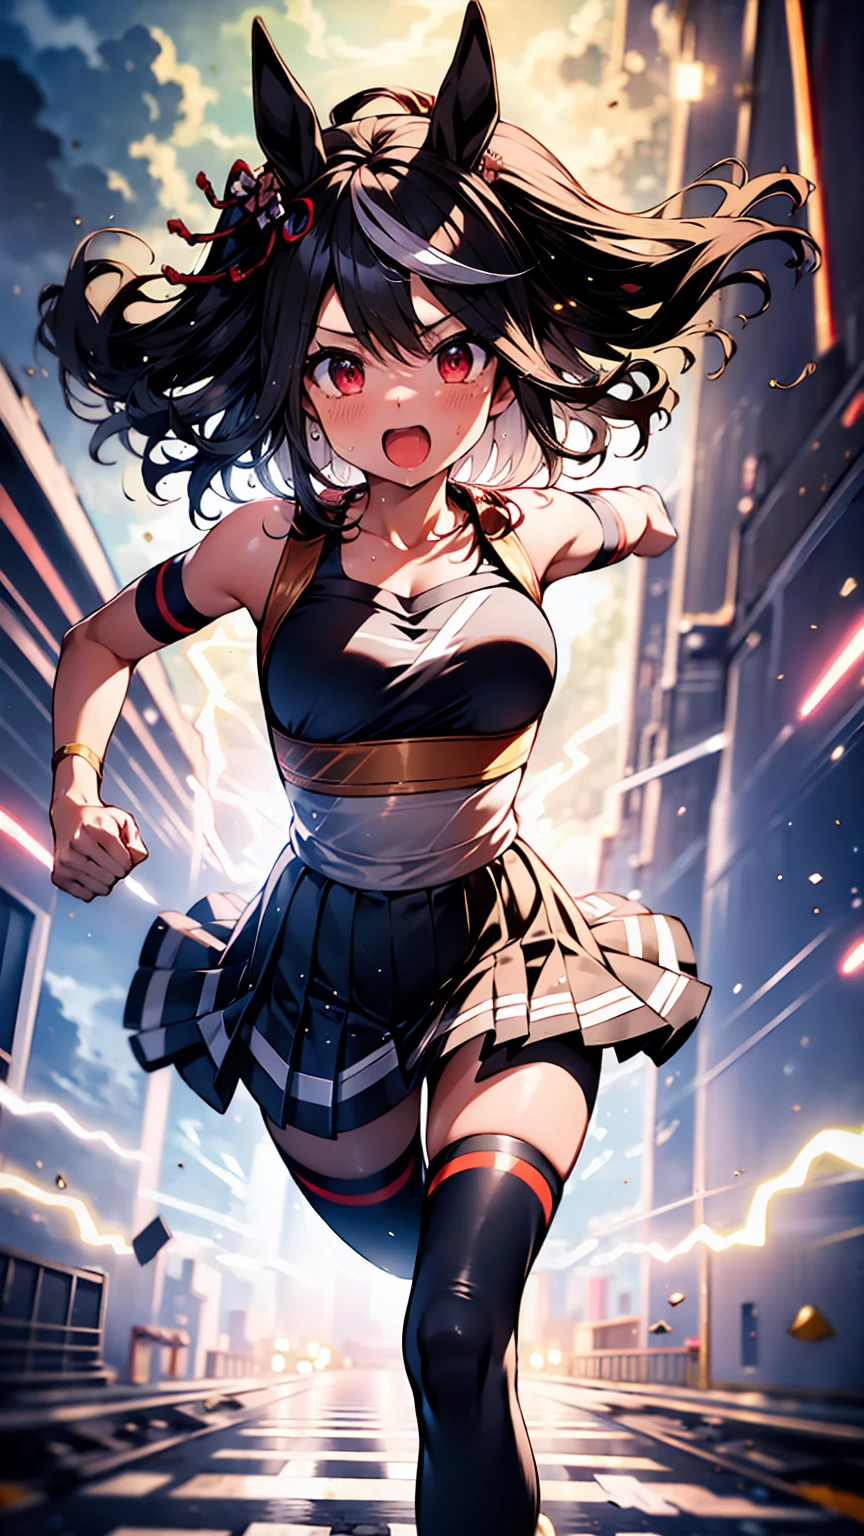 Best image quality、High resolution、masterpiece、super high quality、grit、run、颯爽とrun、Sweaty、Very short pleated skirt、Heavy breathing、Blushing、4K quality、Black Pantyhose、shout、Explosive、Burst speed、sonic、light speed、Open your mouth wide、もの凄い勢いでrun、A big storm is brewing